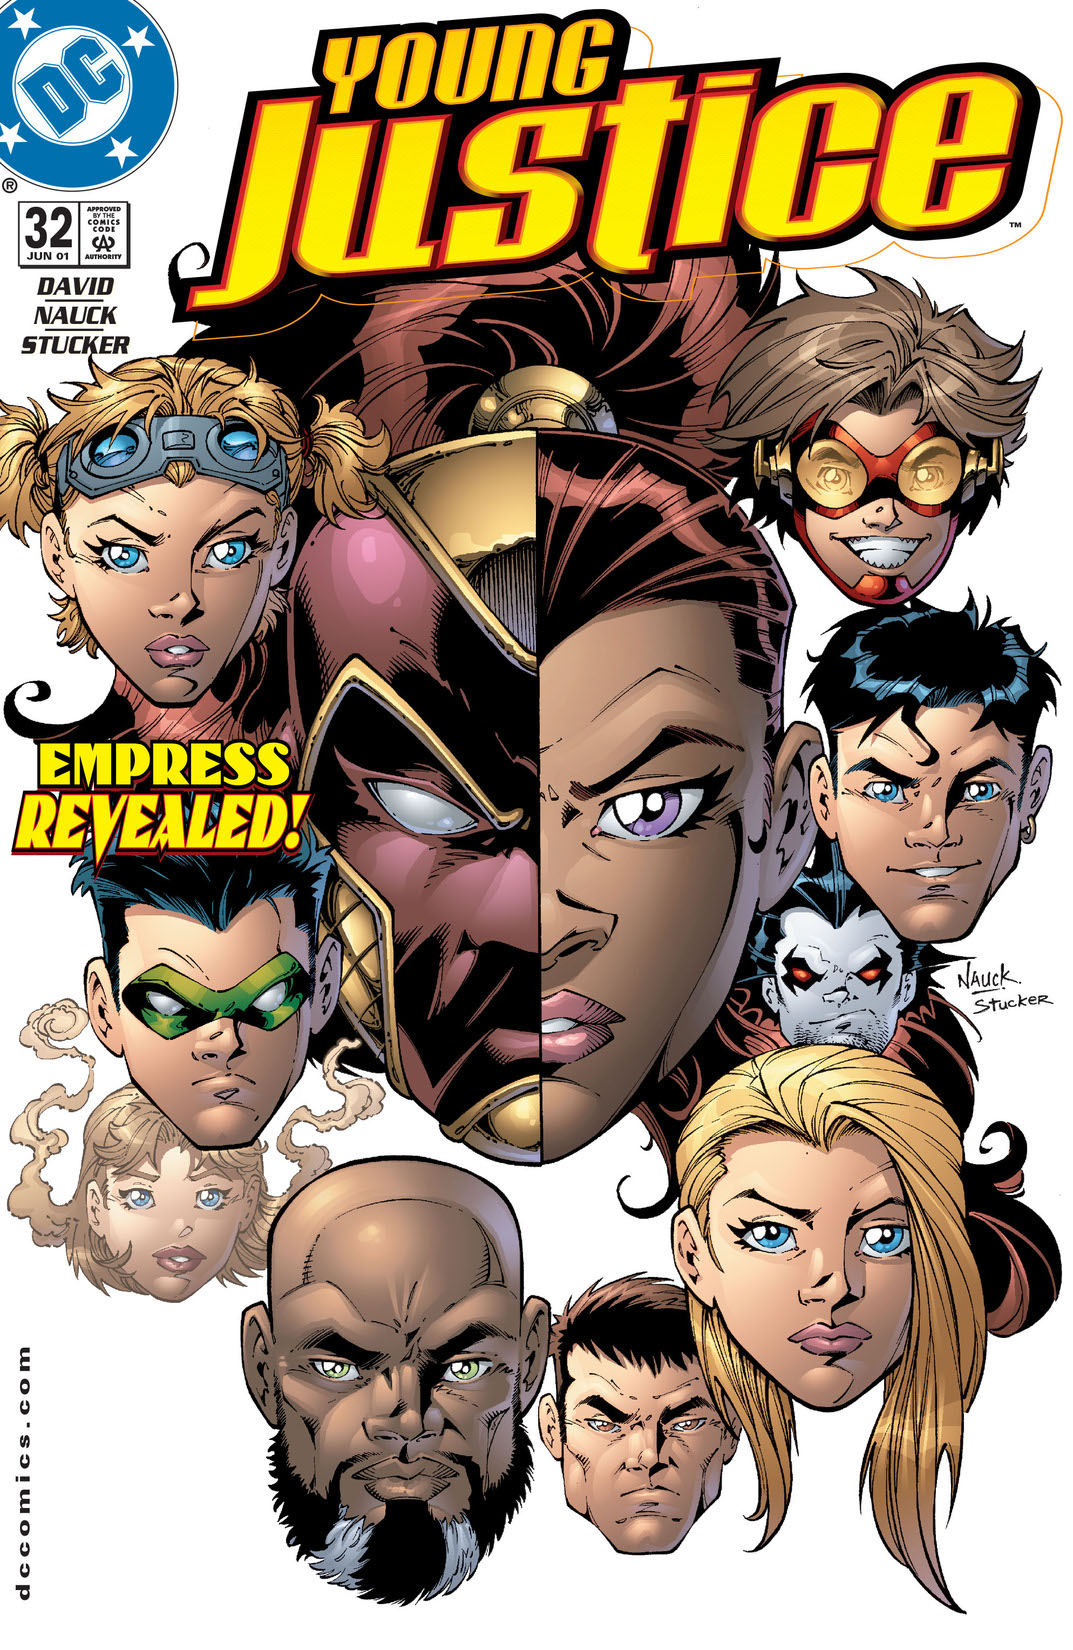 Young Justice (1998-) #32 preview images